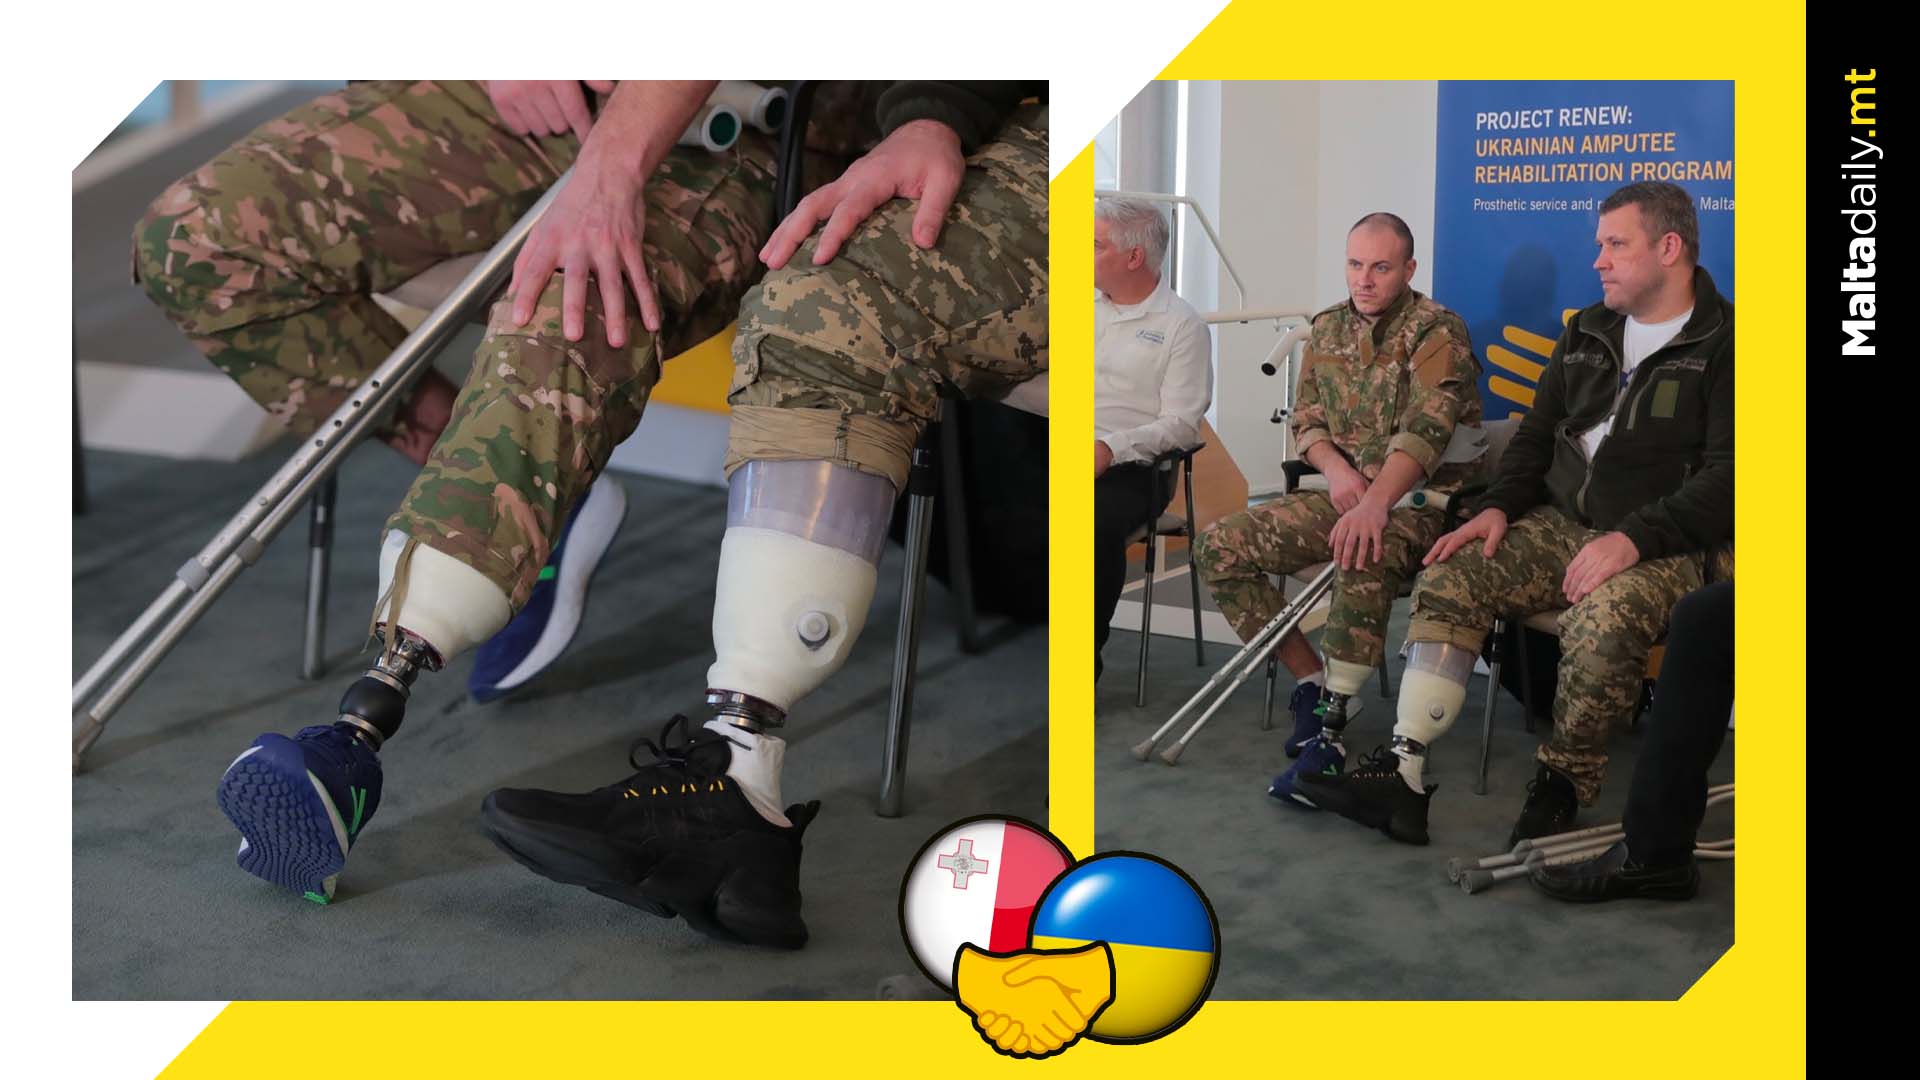 First Ukrainian soldiers receive amputee rehab in Malta